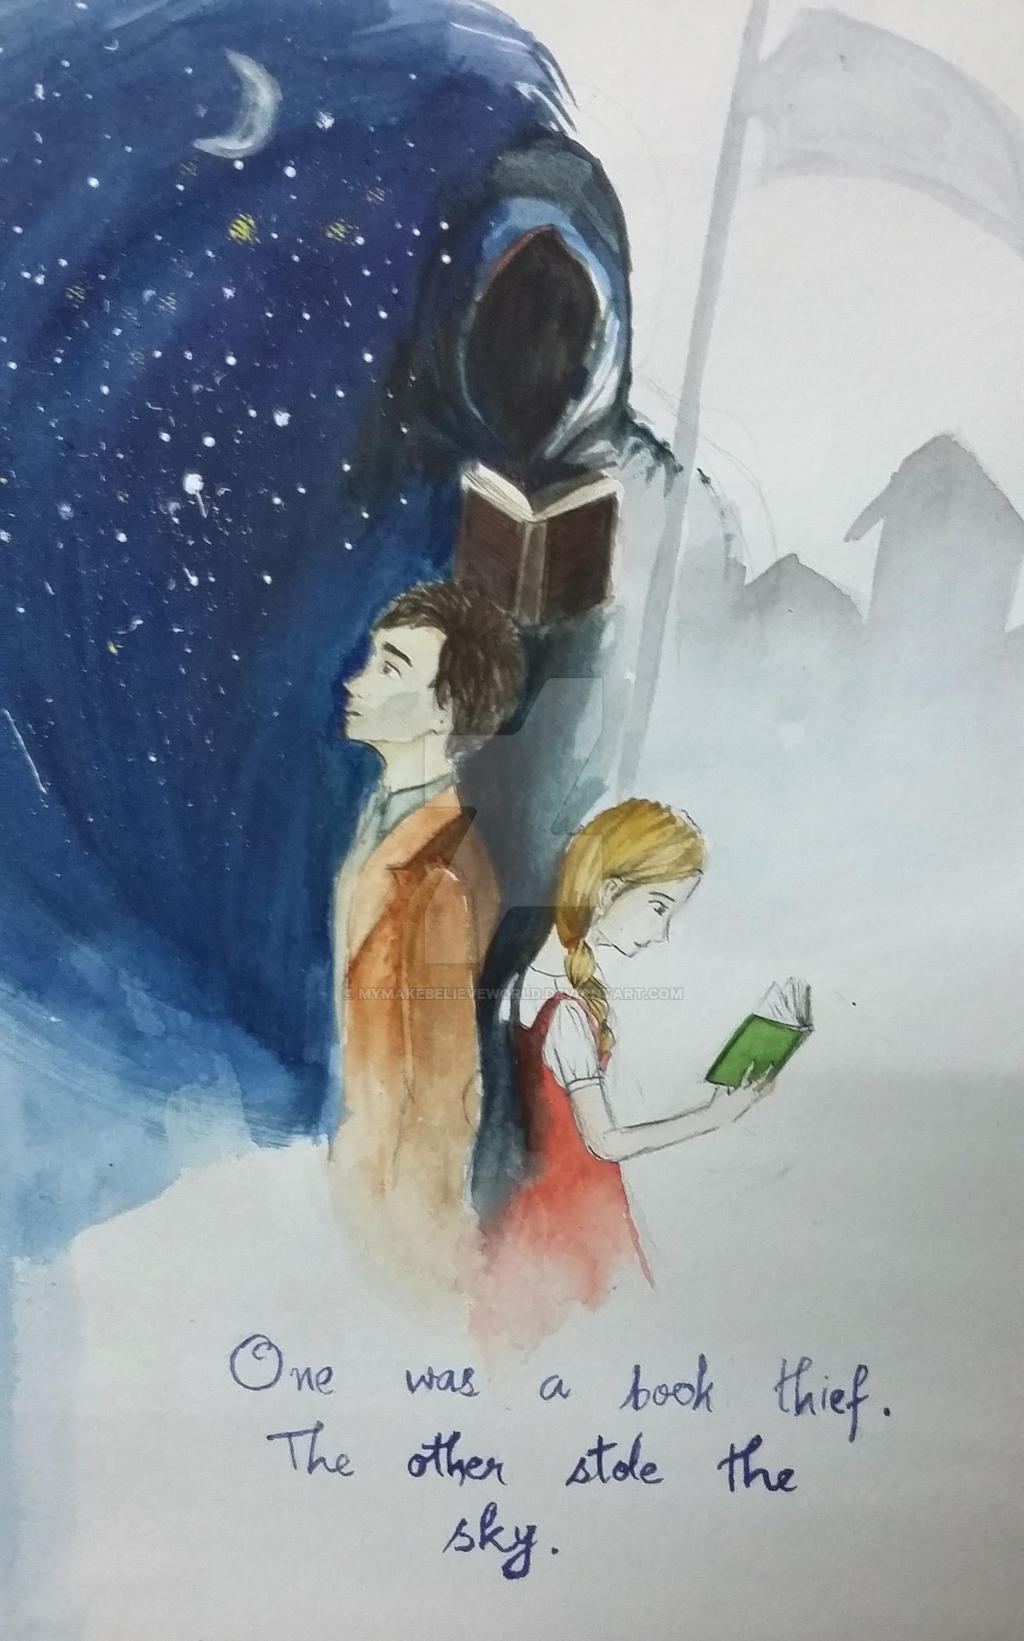 Barbermaskine organisere Nøjagtig One was a book thief. The other stole the sky. by mymakebelieveworld on  DeviantArt